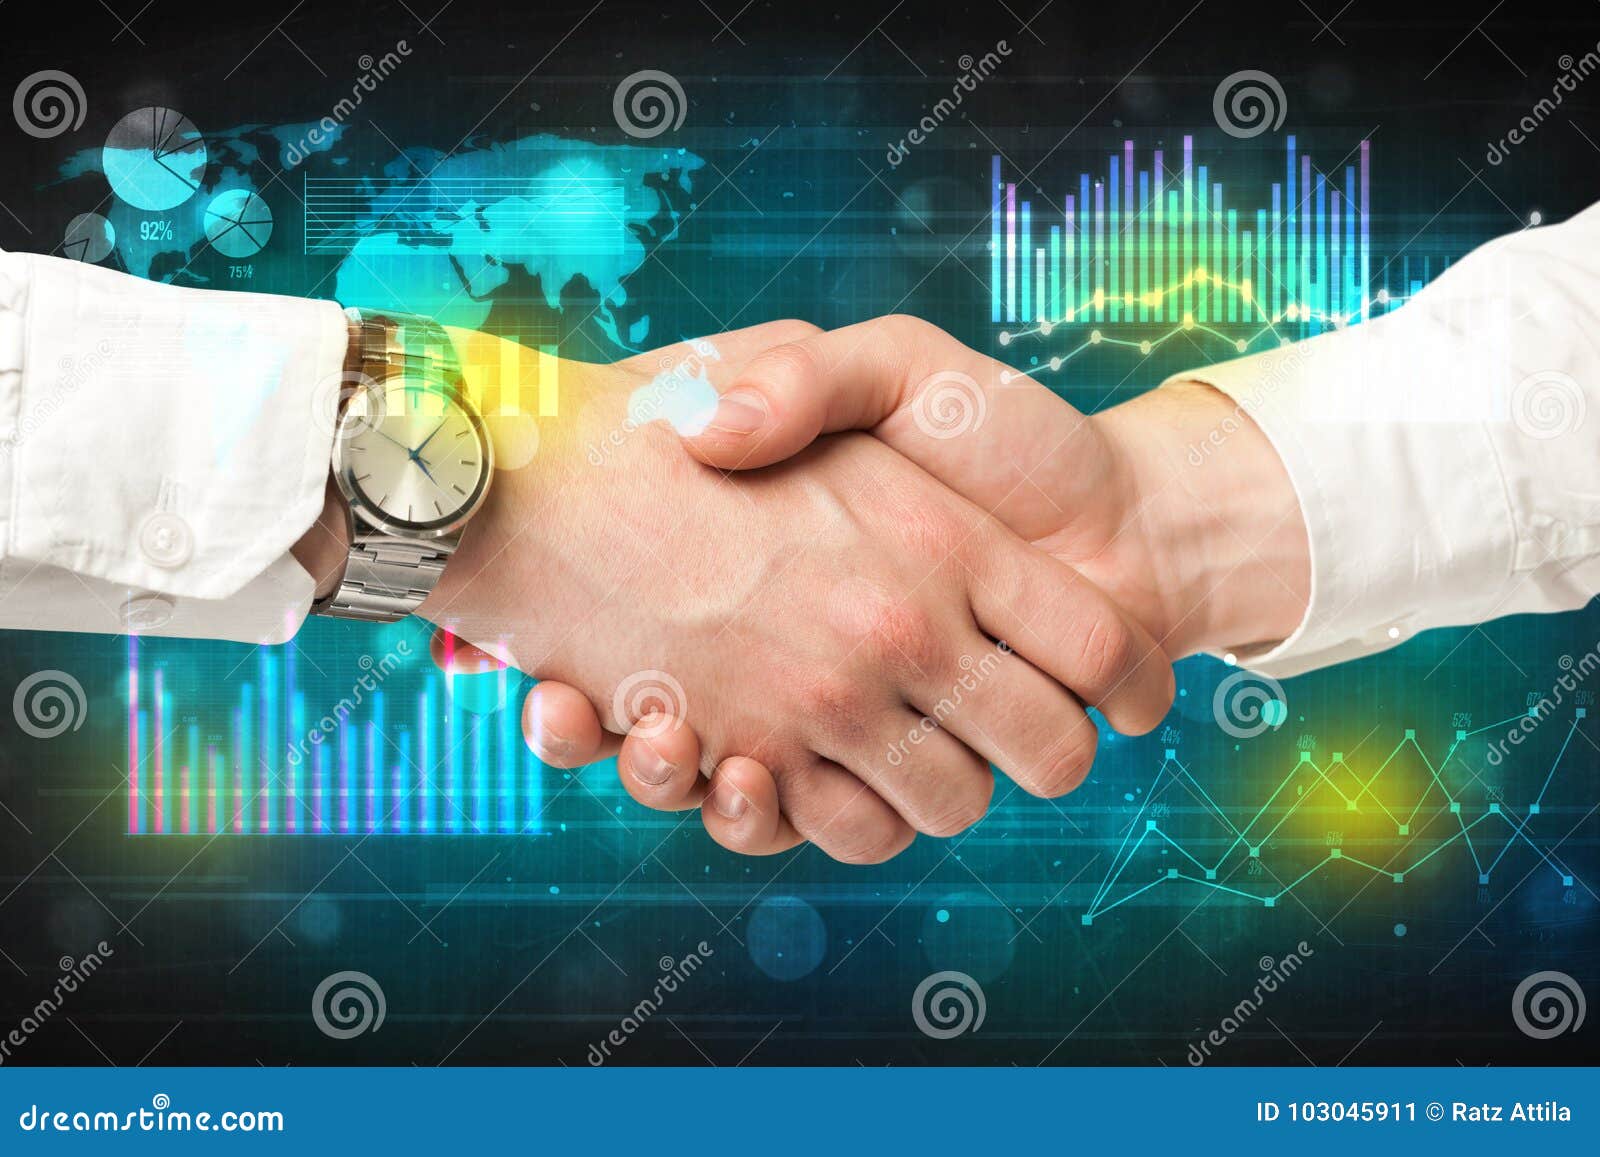 Handshake with diagrams stock image. Image of chart - 103045911